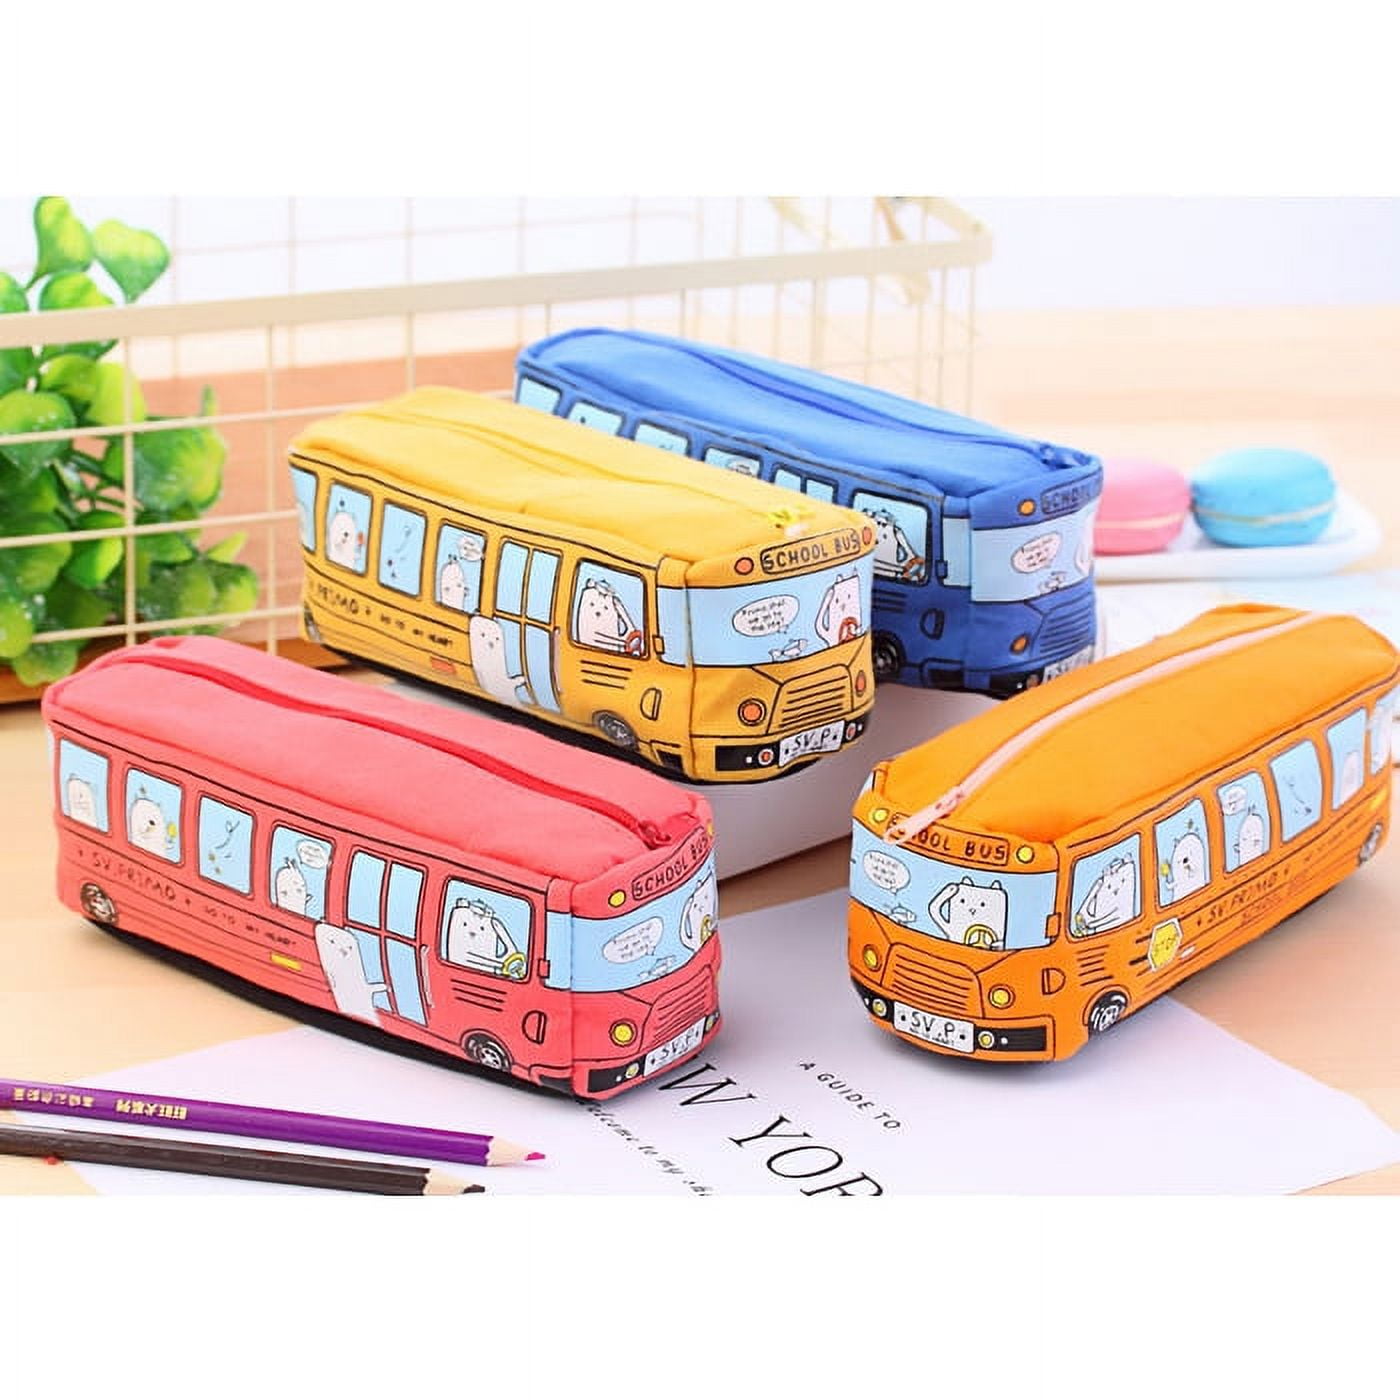  SCIONE Pencil Case for Girls, Large Pencil Pouch School  Supplies for Kids with Dry-erase Board, Big Capacity Zipper Cute Pen Box Bag  Organizer, Back to School Gifts for Student Teens